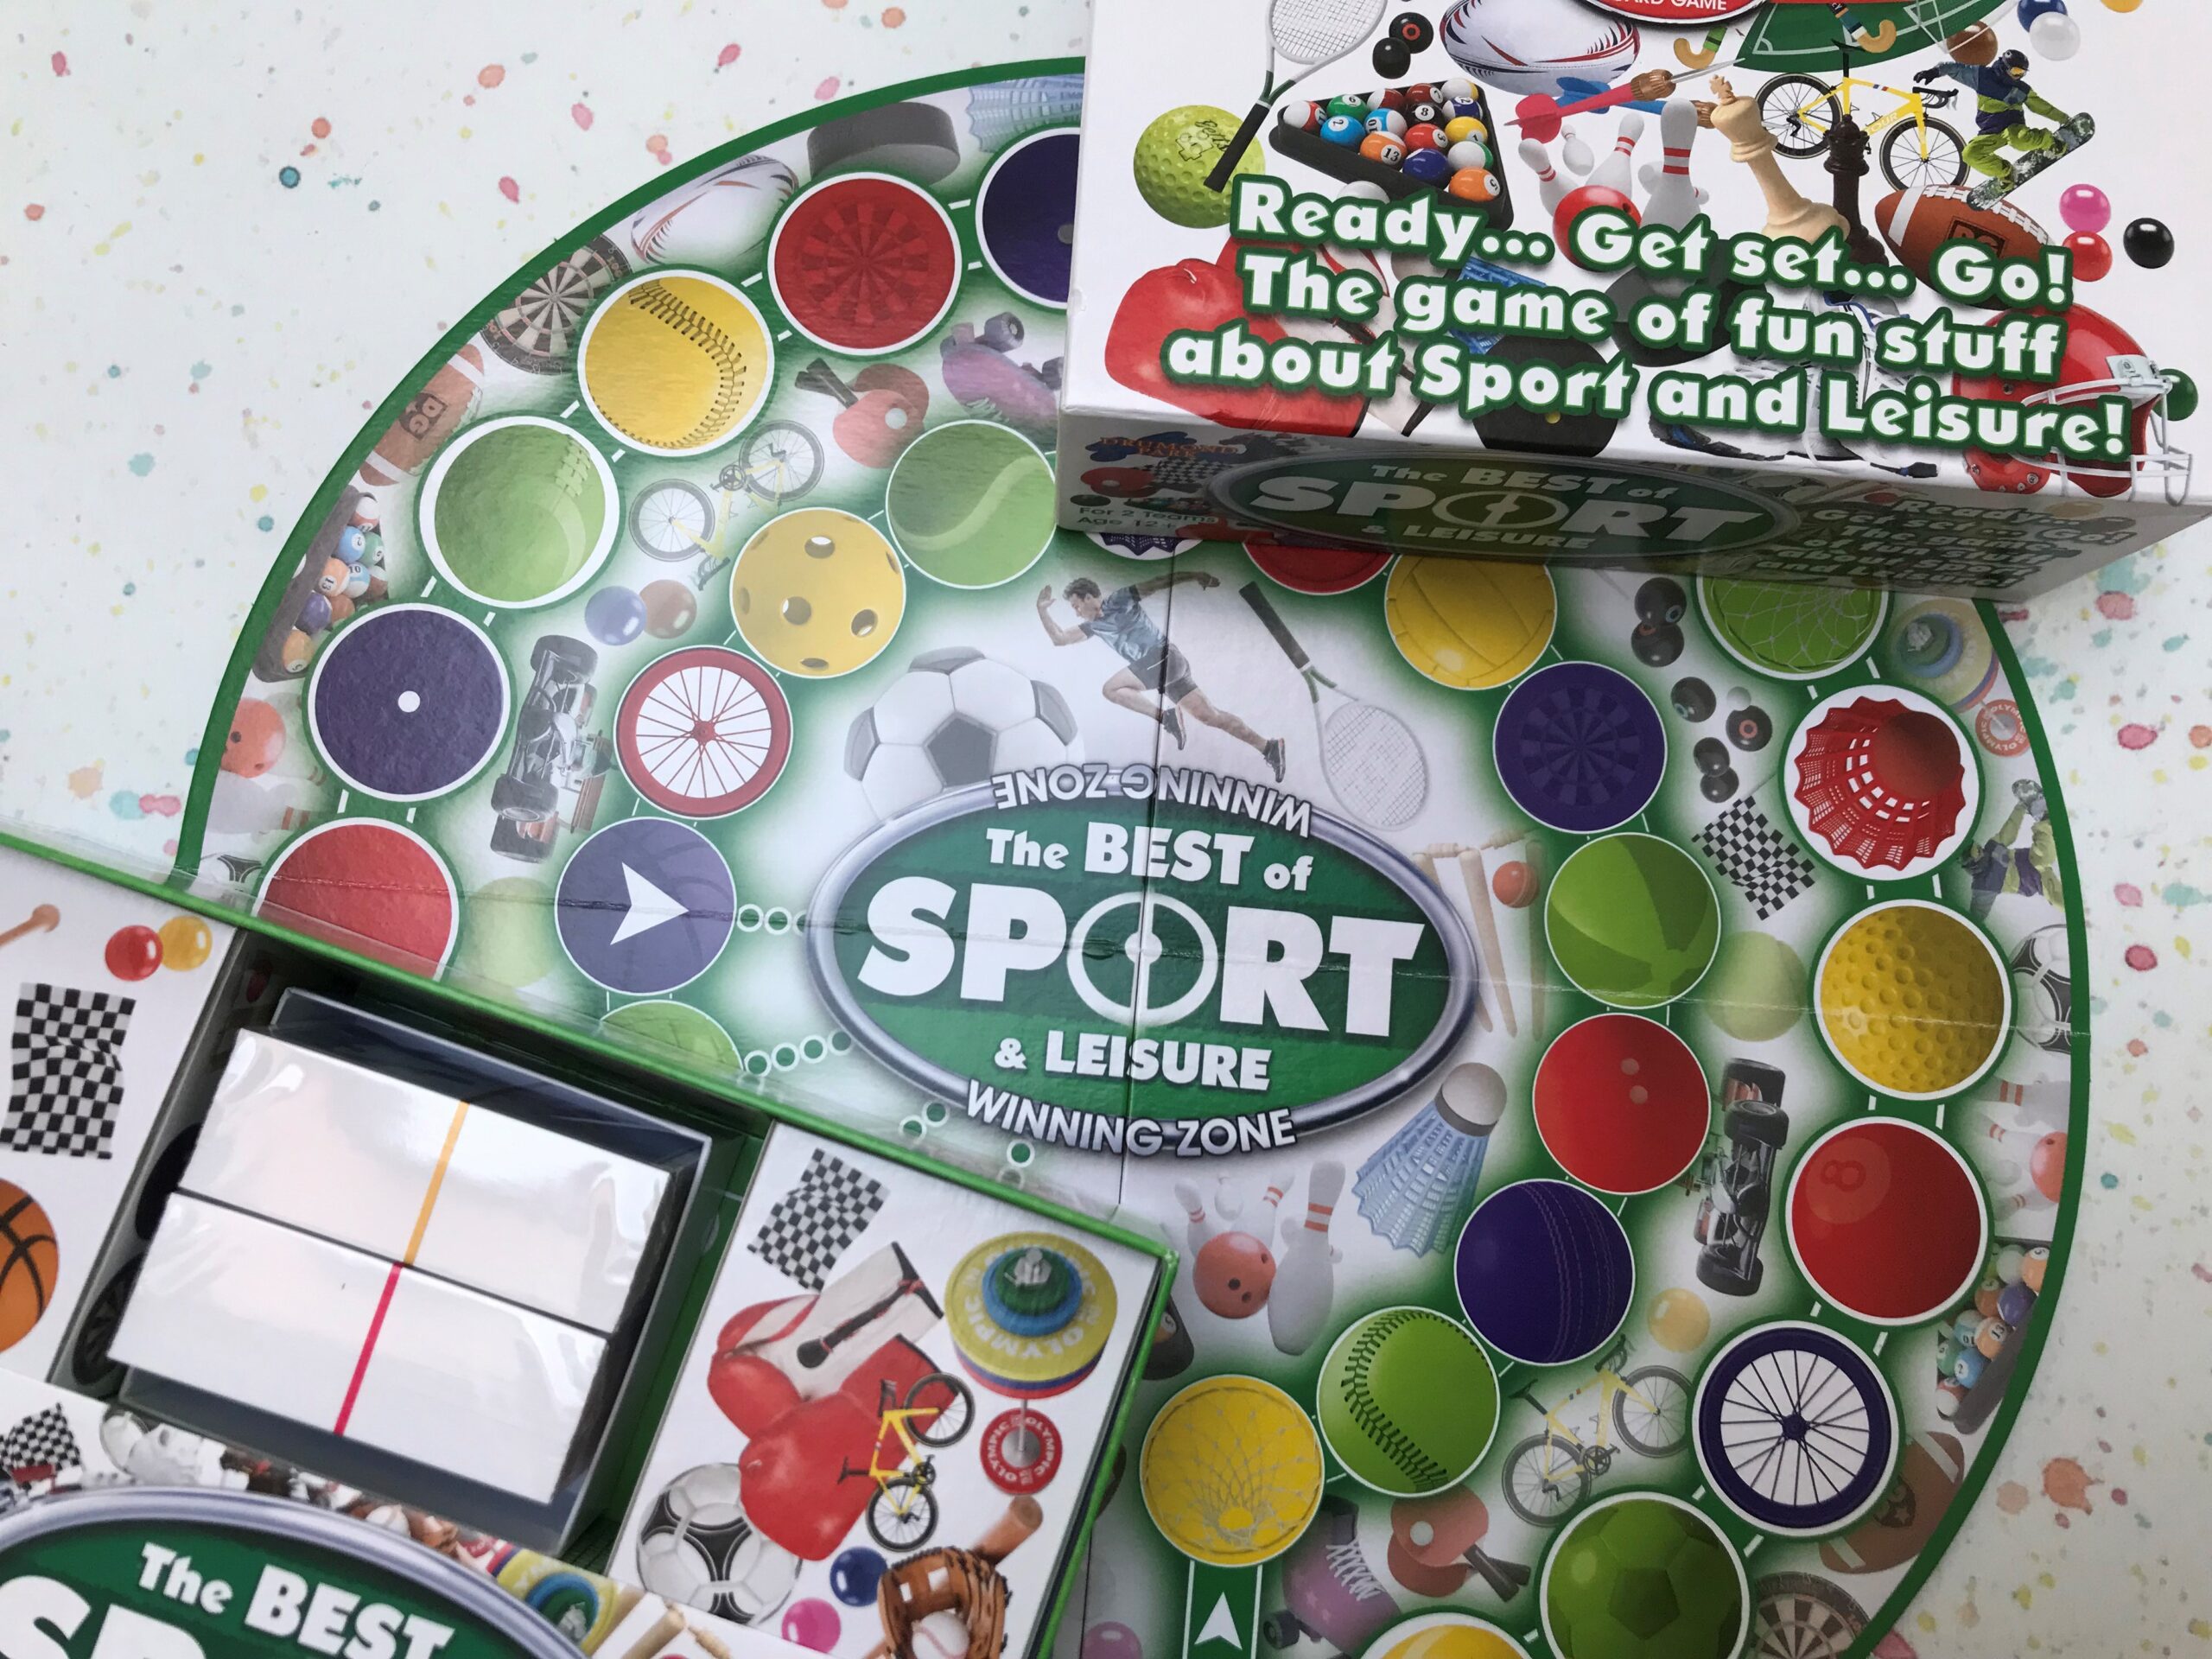 Board Game for Sports 12 Drumond Park LOGO Best of Sport and Leisure Board Game 